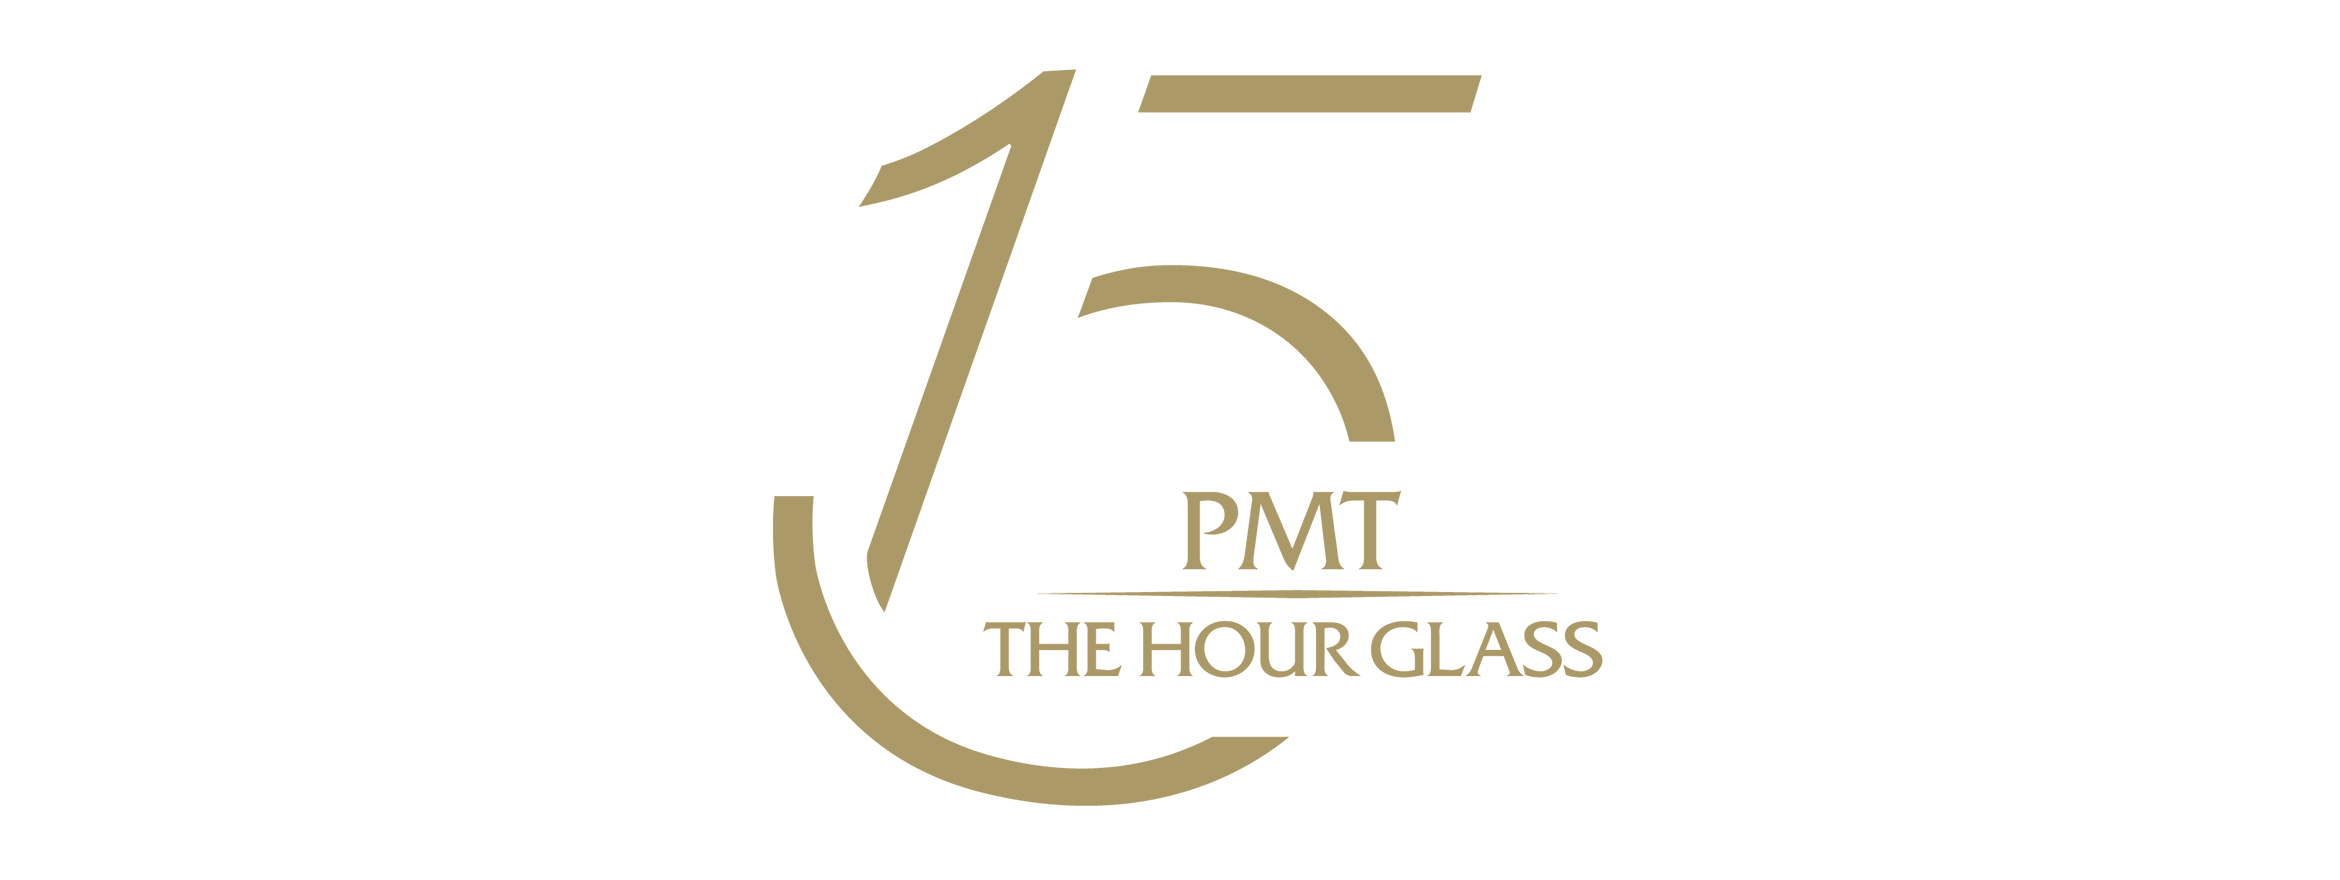 PMT The Hour Glass Celebrates 15 Years of Partnership